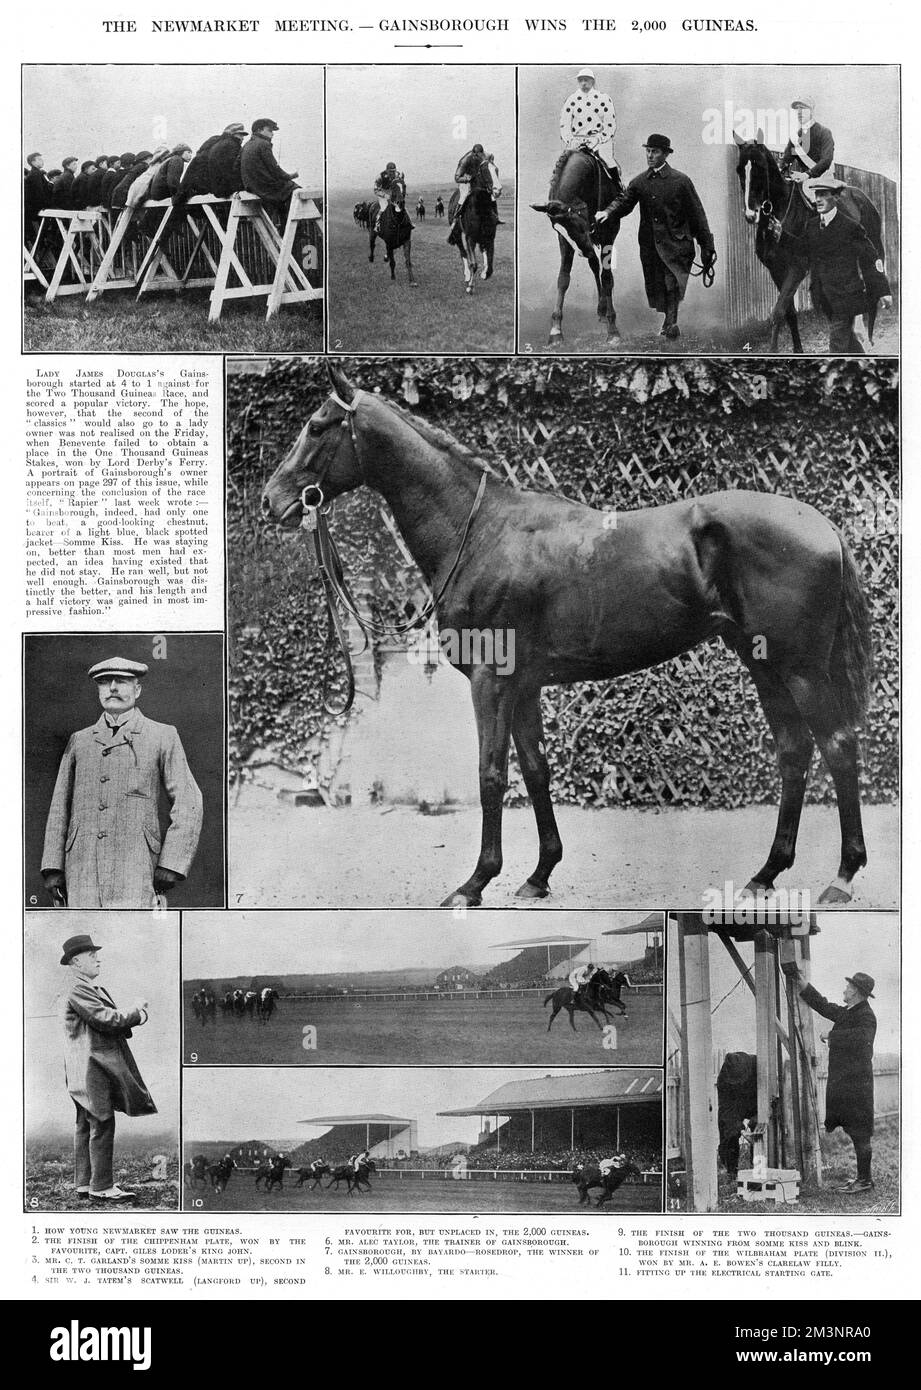 The British bred, thoroughbred racehorse 'Gainsborough', owned by Lady James Douglas won the English Triple Crown in 1918. This article celebrates the 2000 Guineas, the first of the three races one by Gainsborough. This win also marked the first time a horse bred by a woman won one of the British Classic Races.     Date: May 1918 Stock Photo